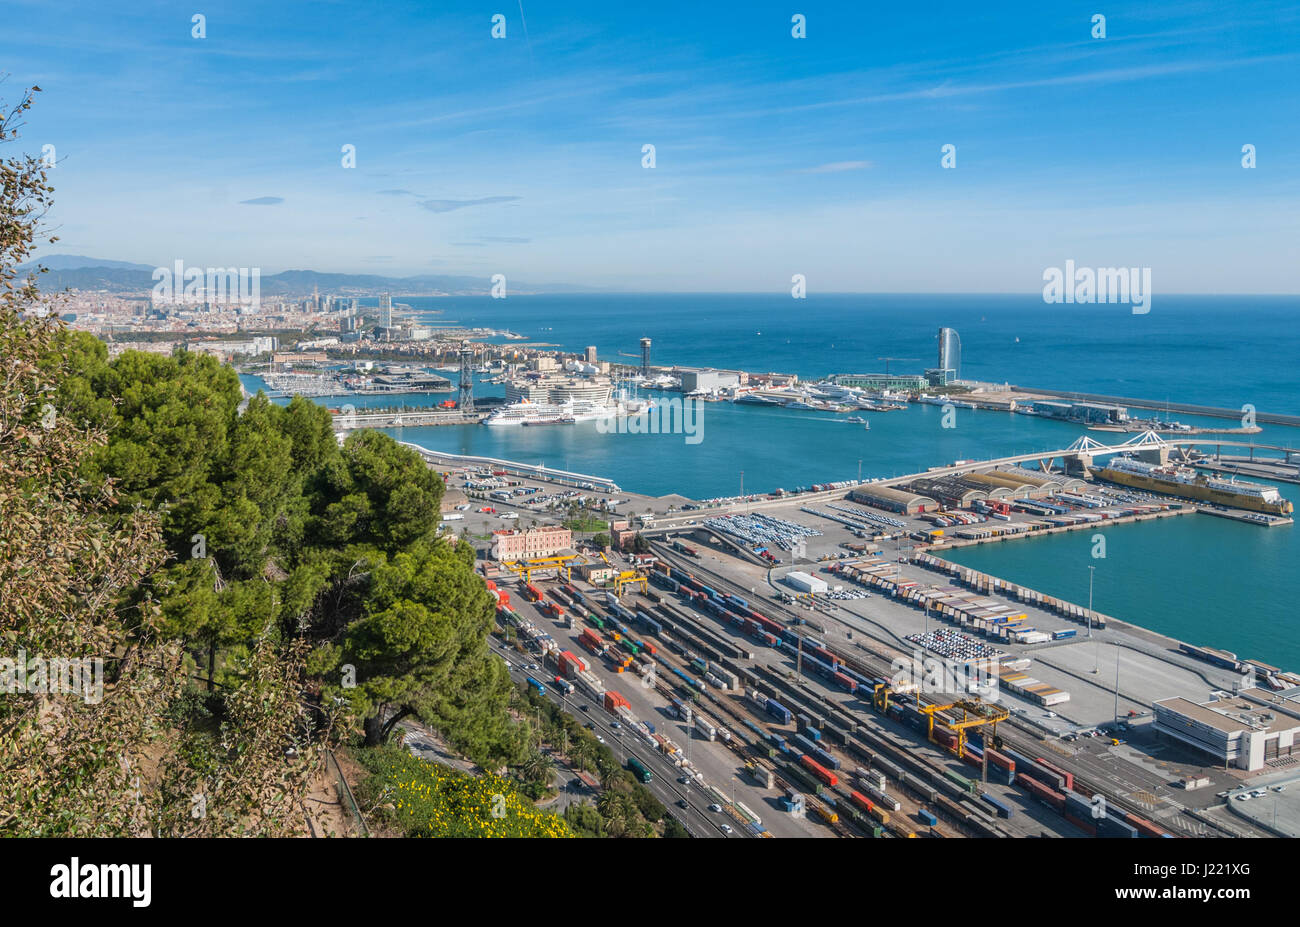 Bright sunny day on the industrial shipping & transport hub & railyard in Barcelona.  Modern cityscape & coastline of Spain. Stock Photo